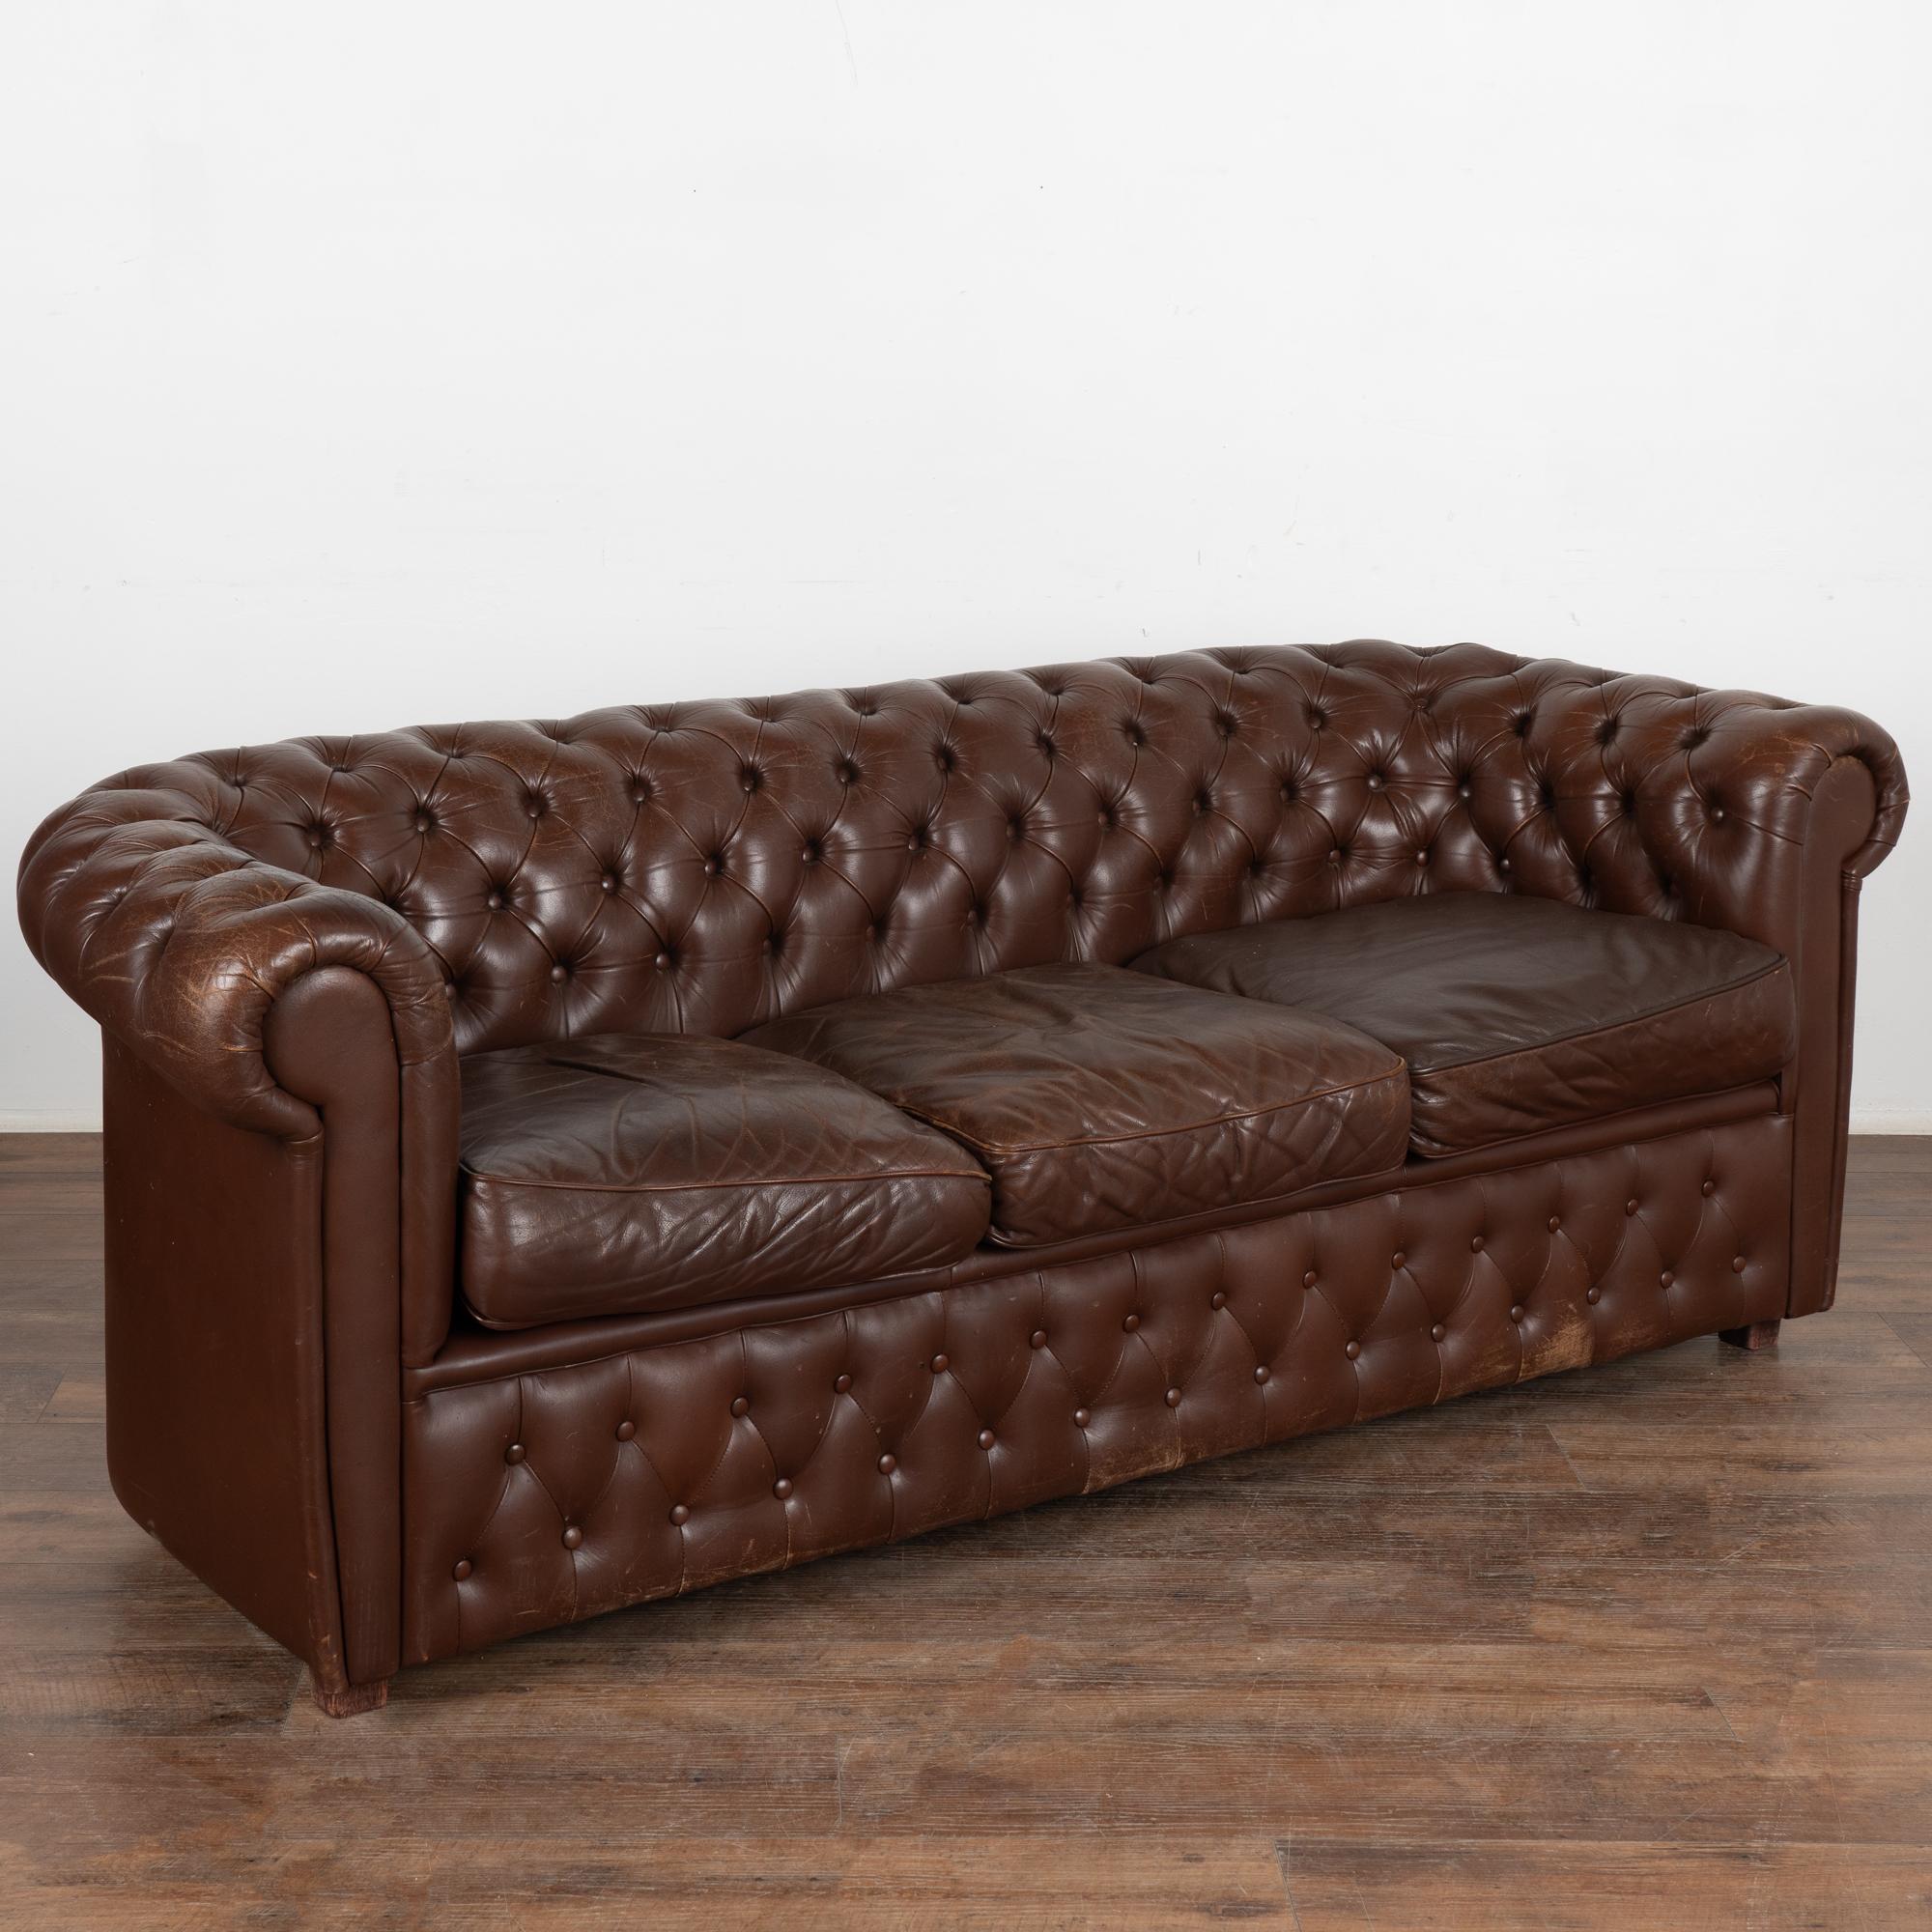 Danish Chesterfield Style Brown Leather 3 Seat Sofa & 2 Club Chairs, circa 1920-40 For Sale